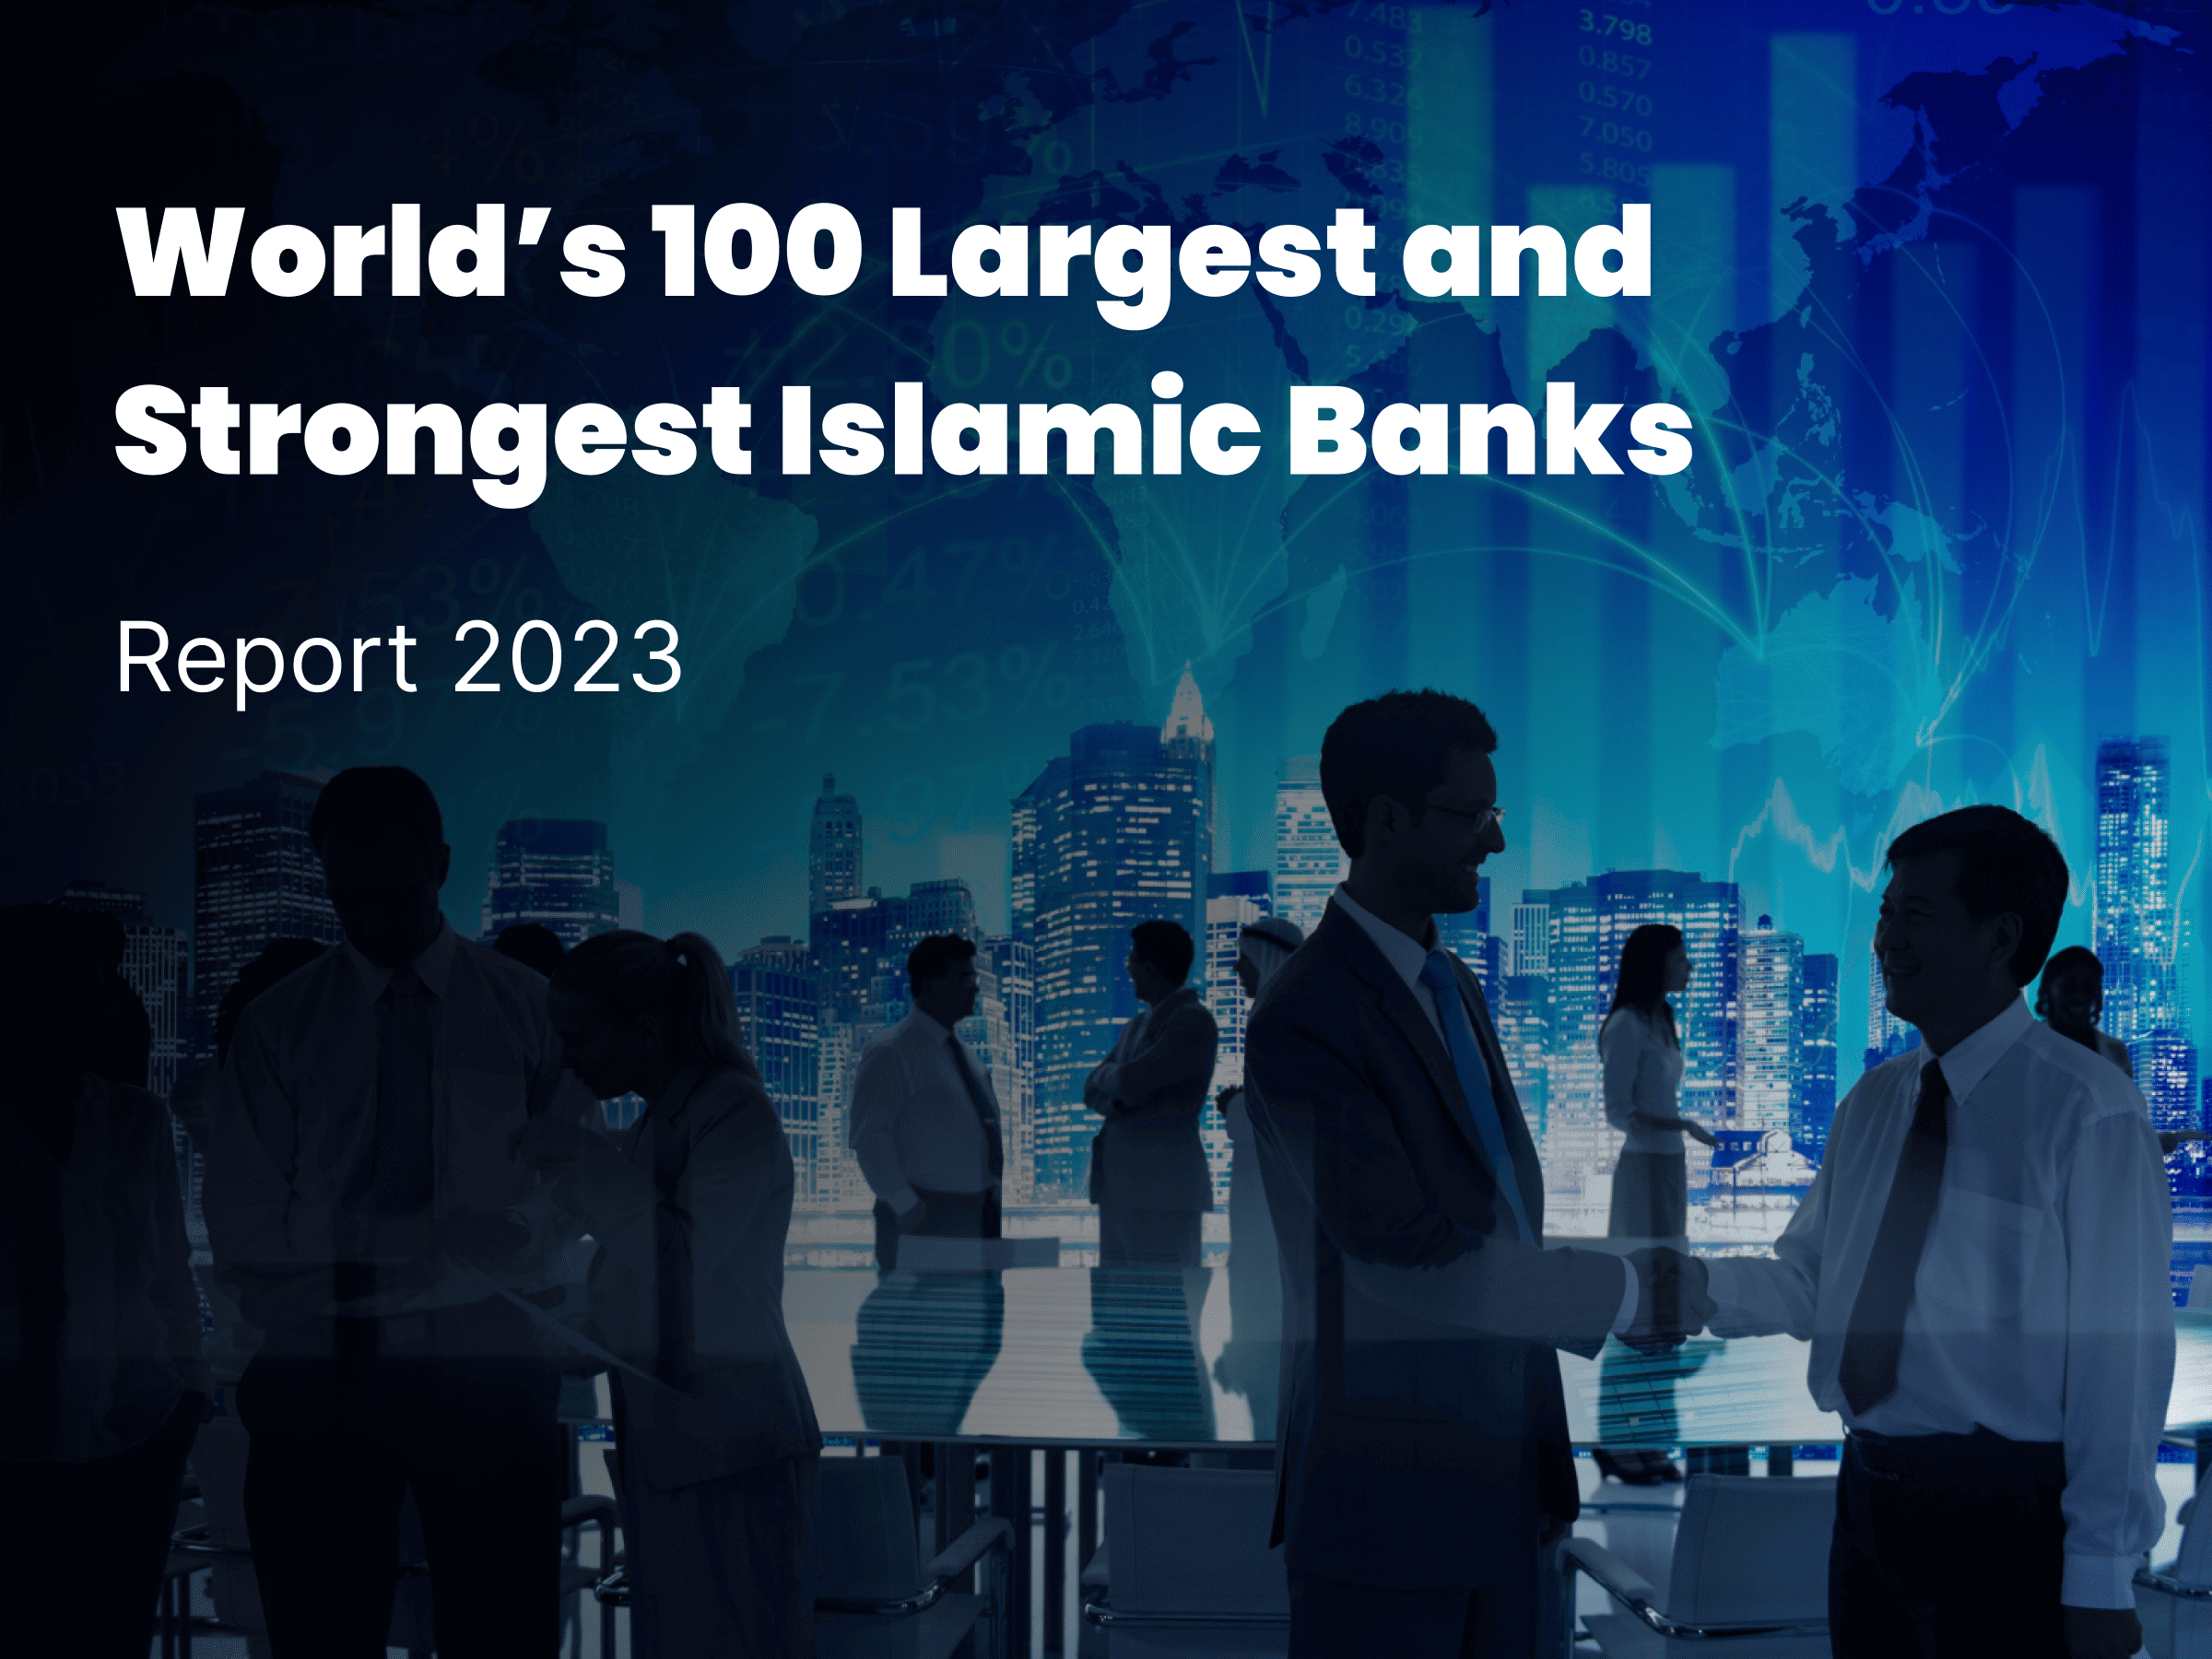 World’s 100 Largest and Strongest Islamic Banks Report 2023